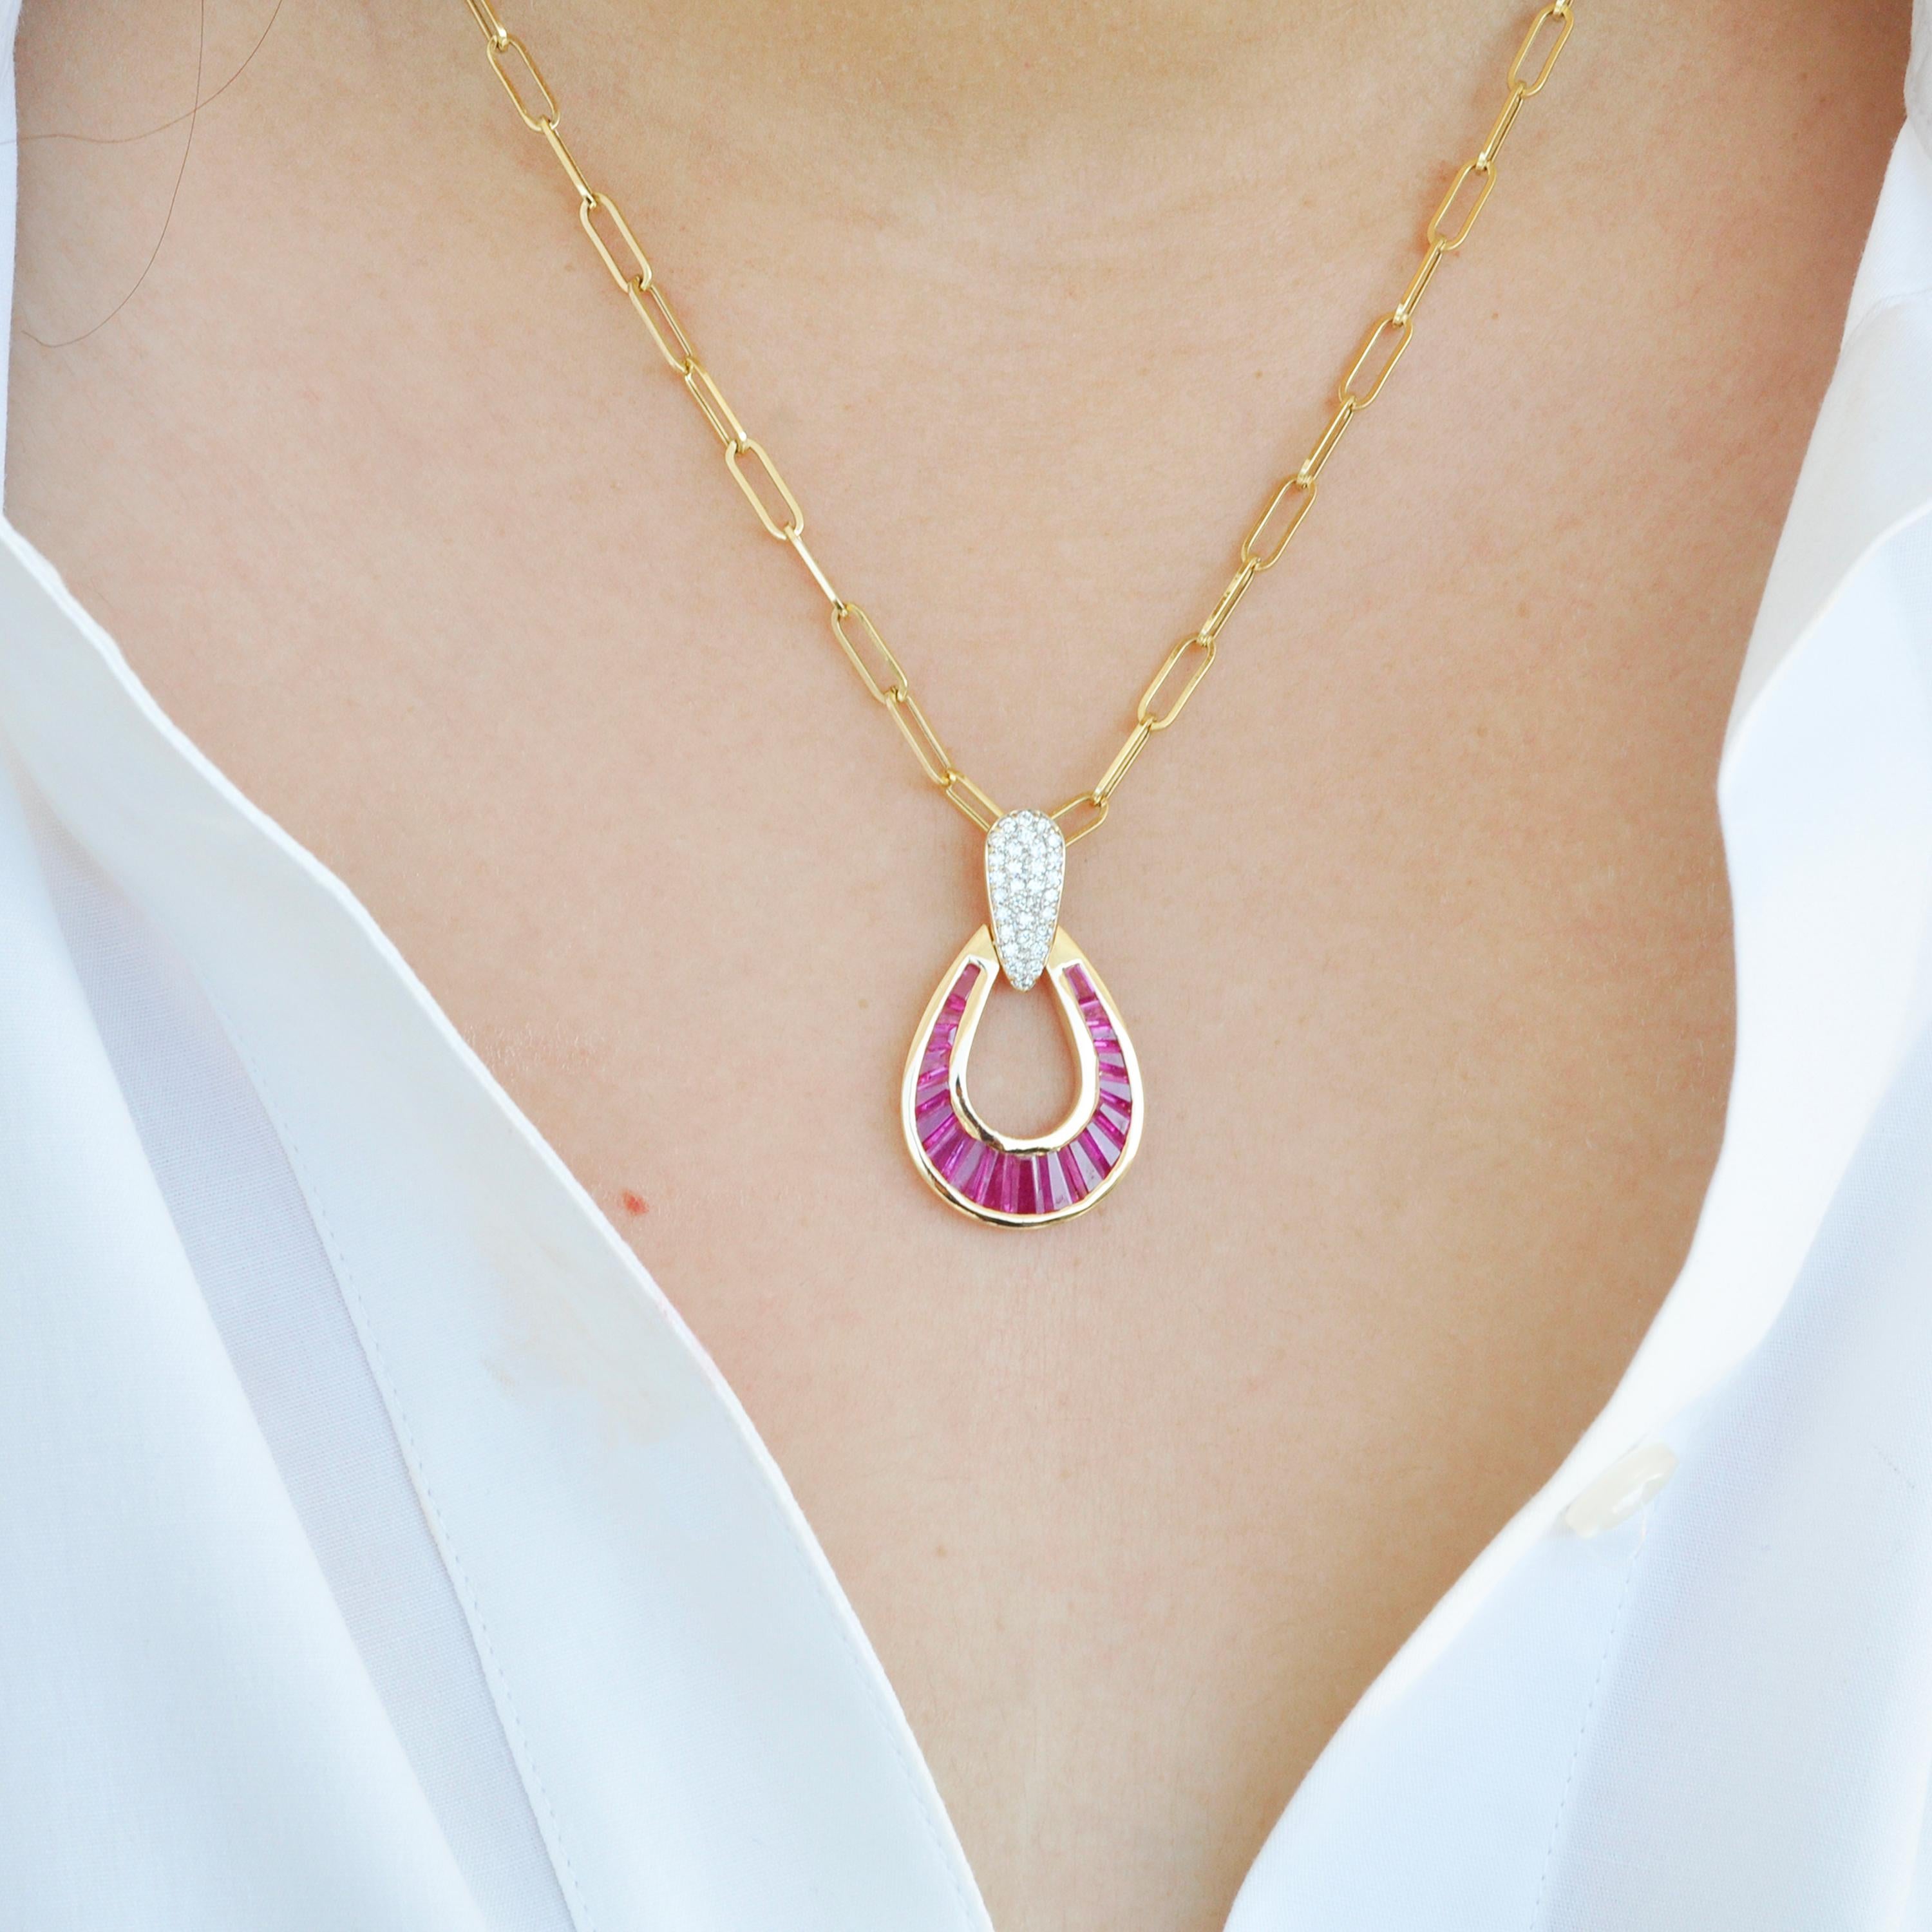 Taper baguette calibre cut ruby 18k gold diamond tear-drop pendant necklace.

This extraordinary raindrop crimson red ruby pendant is encapsulating. Meticulous hand-picked selections of lustrous ruby gemstones out of many are set individually